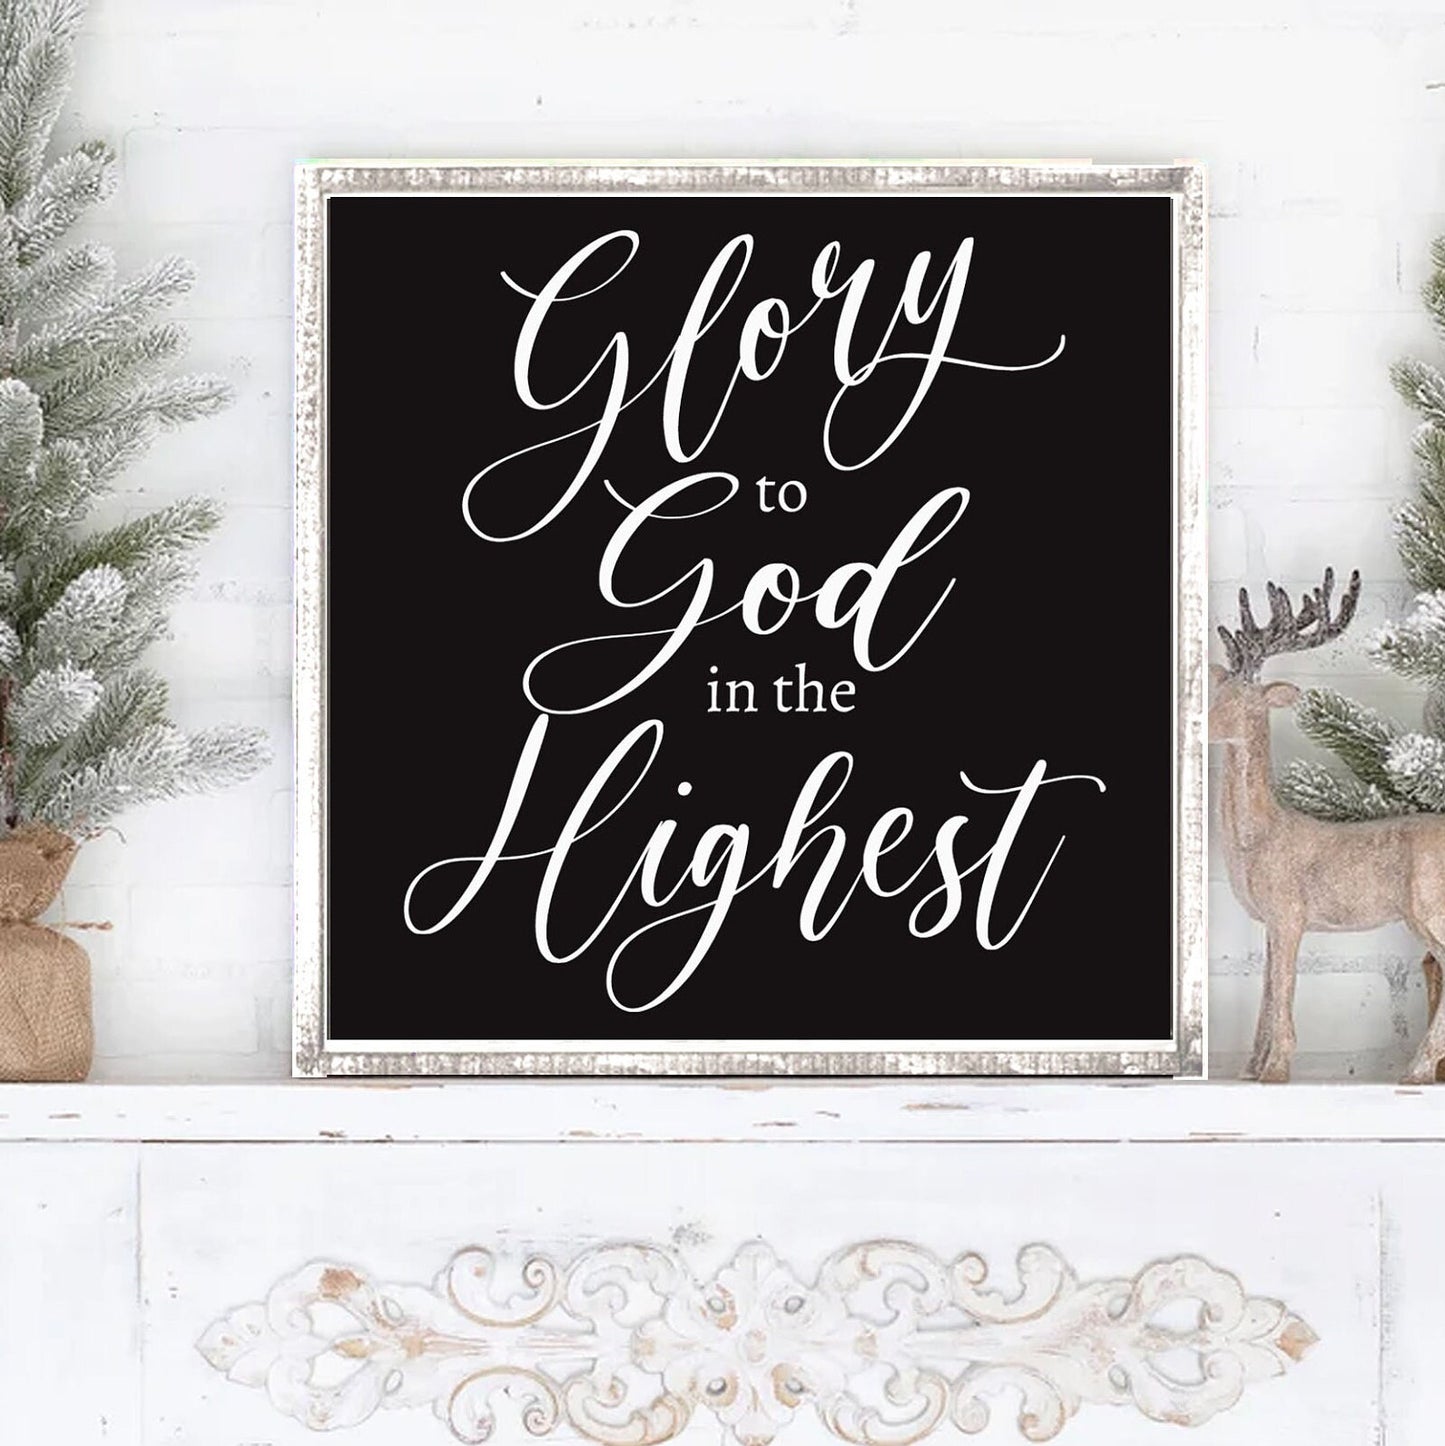 GLORY TO GOD In The Highest Christmas Rustic Wood Sign  | Glory to God In the Highest Framed Christmas wood sign | Christmas Decor Luke 2:14